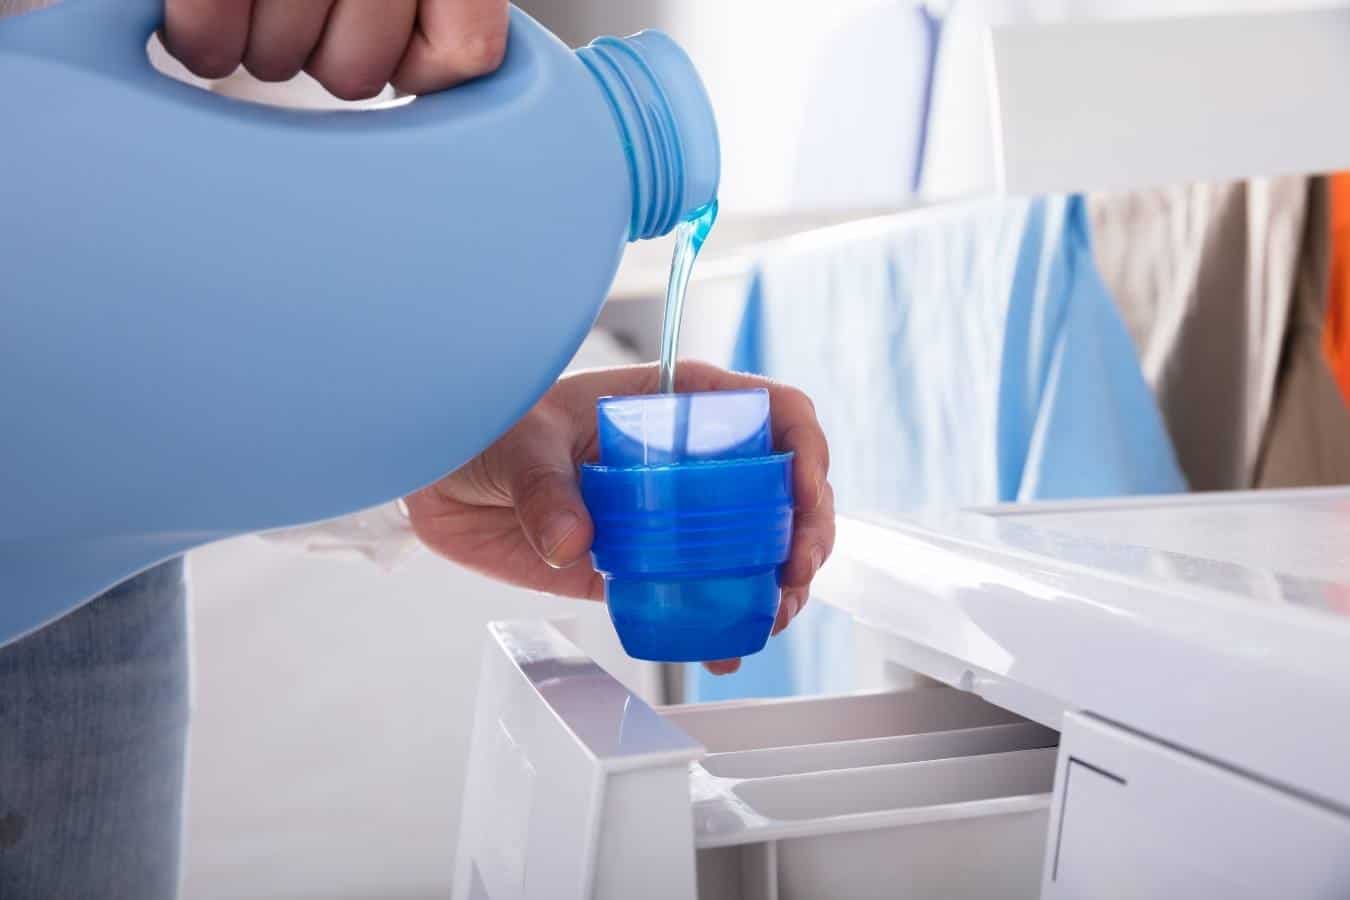 How To Use Laundry Detergent To Remove Hair Dye